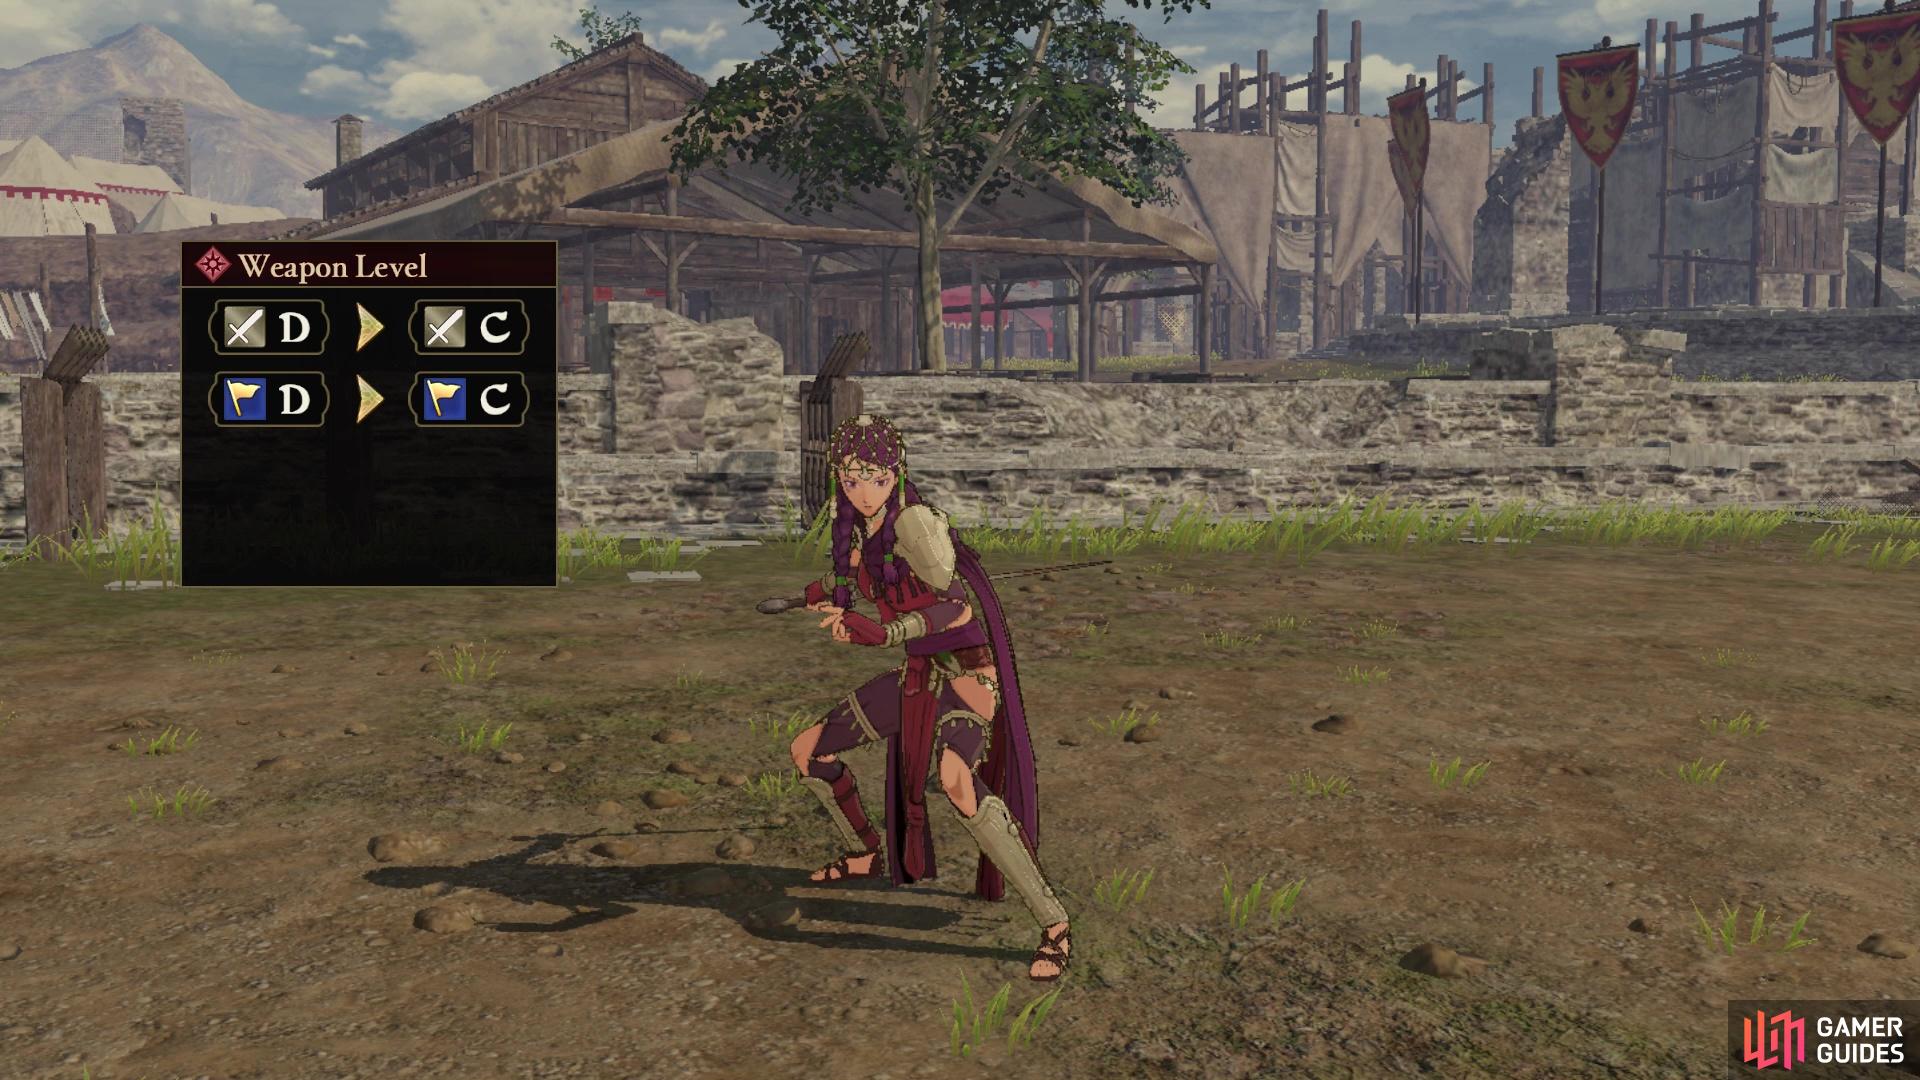 Changing classes can improve that characters Weapon Level proficency